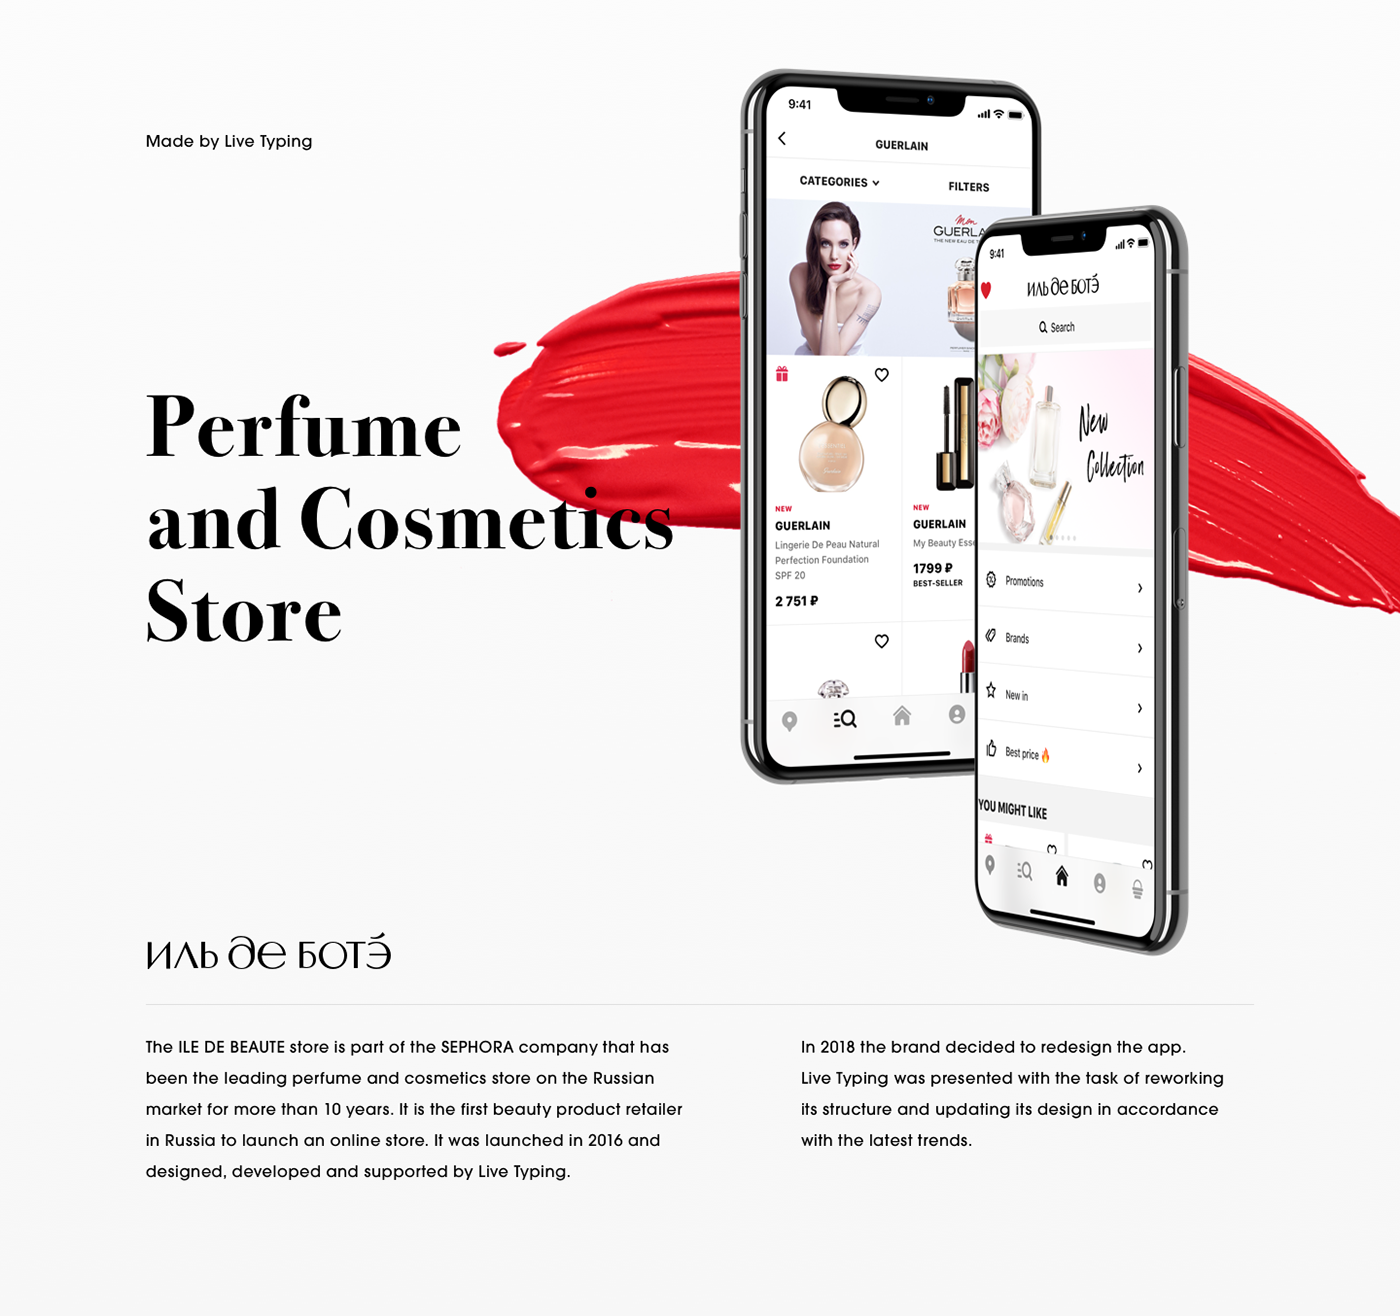 Ecommerce beauty ux UI ios android app Catalogue mobile